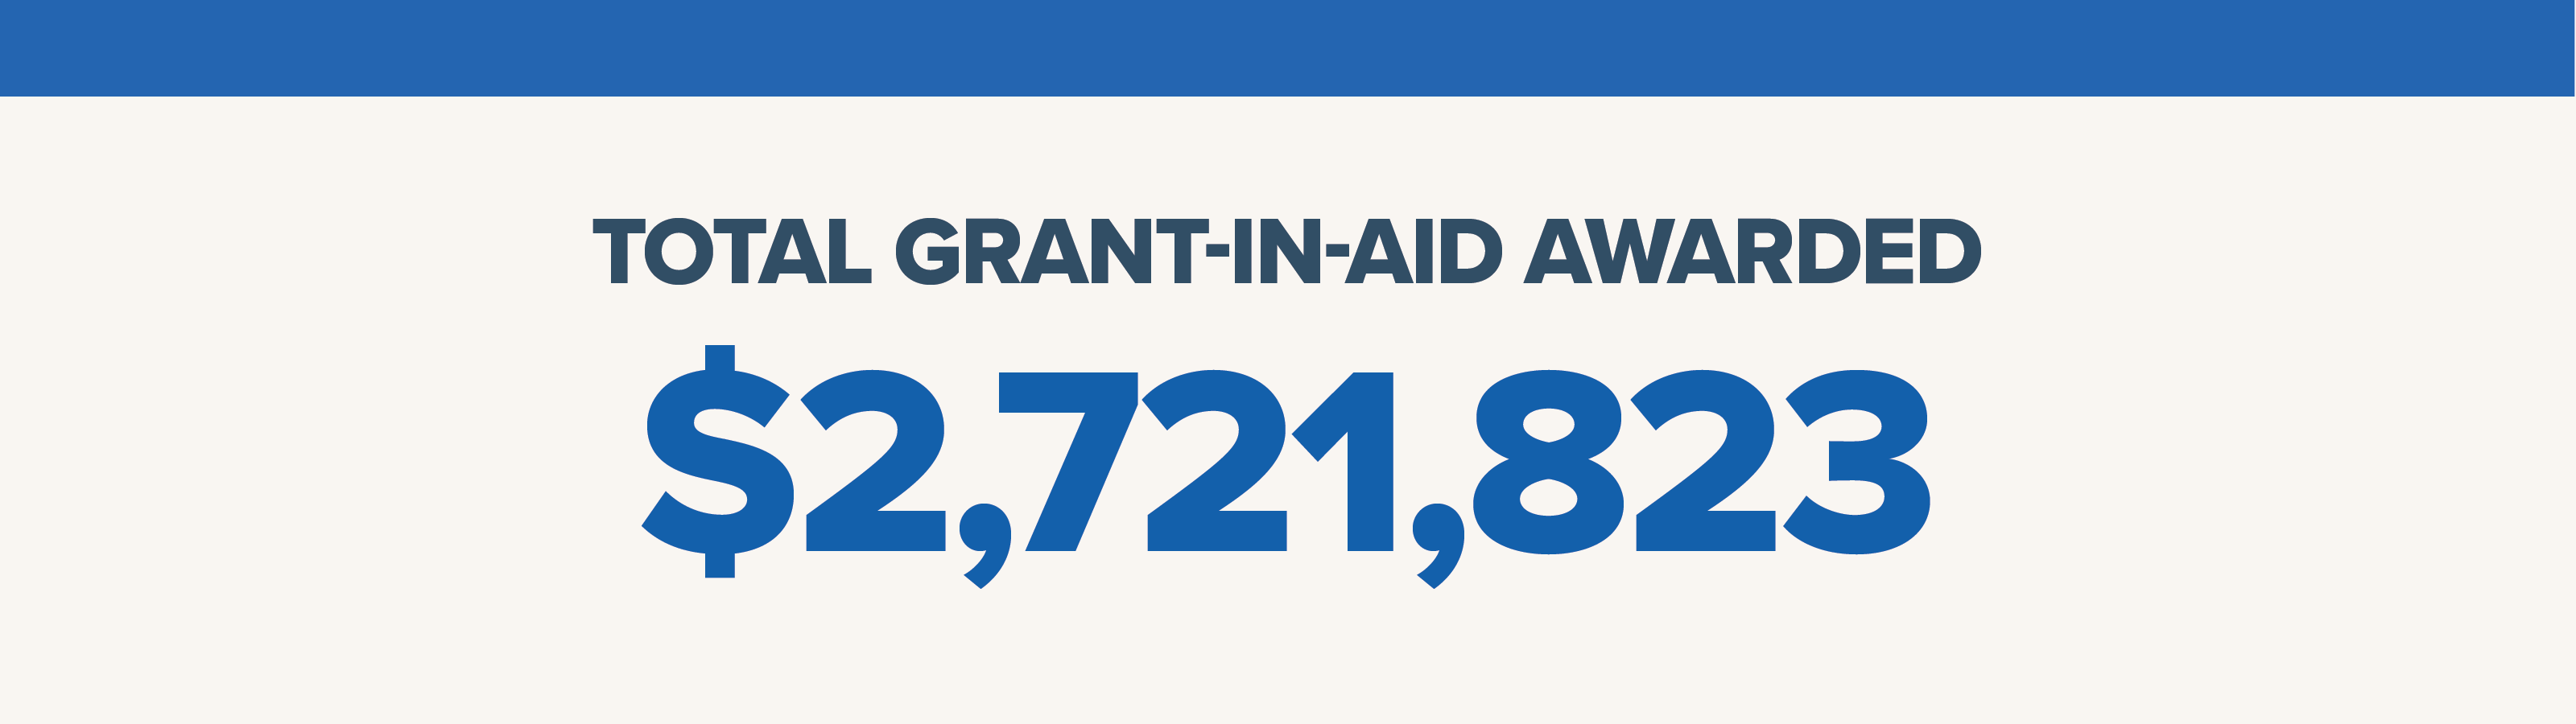 $2,721,823 total Grant-in-Aid awarded